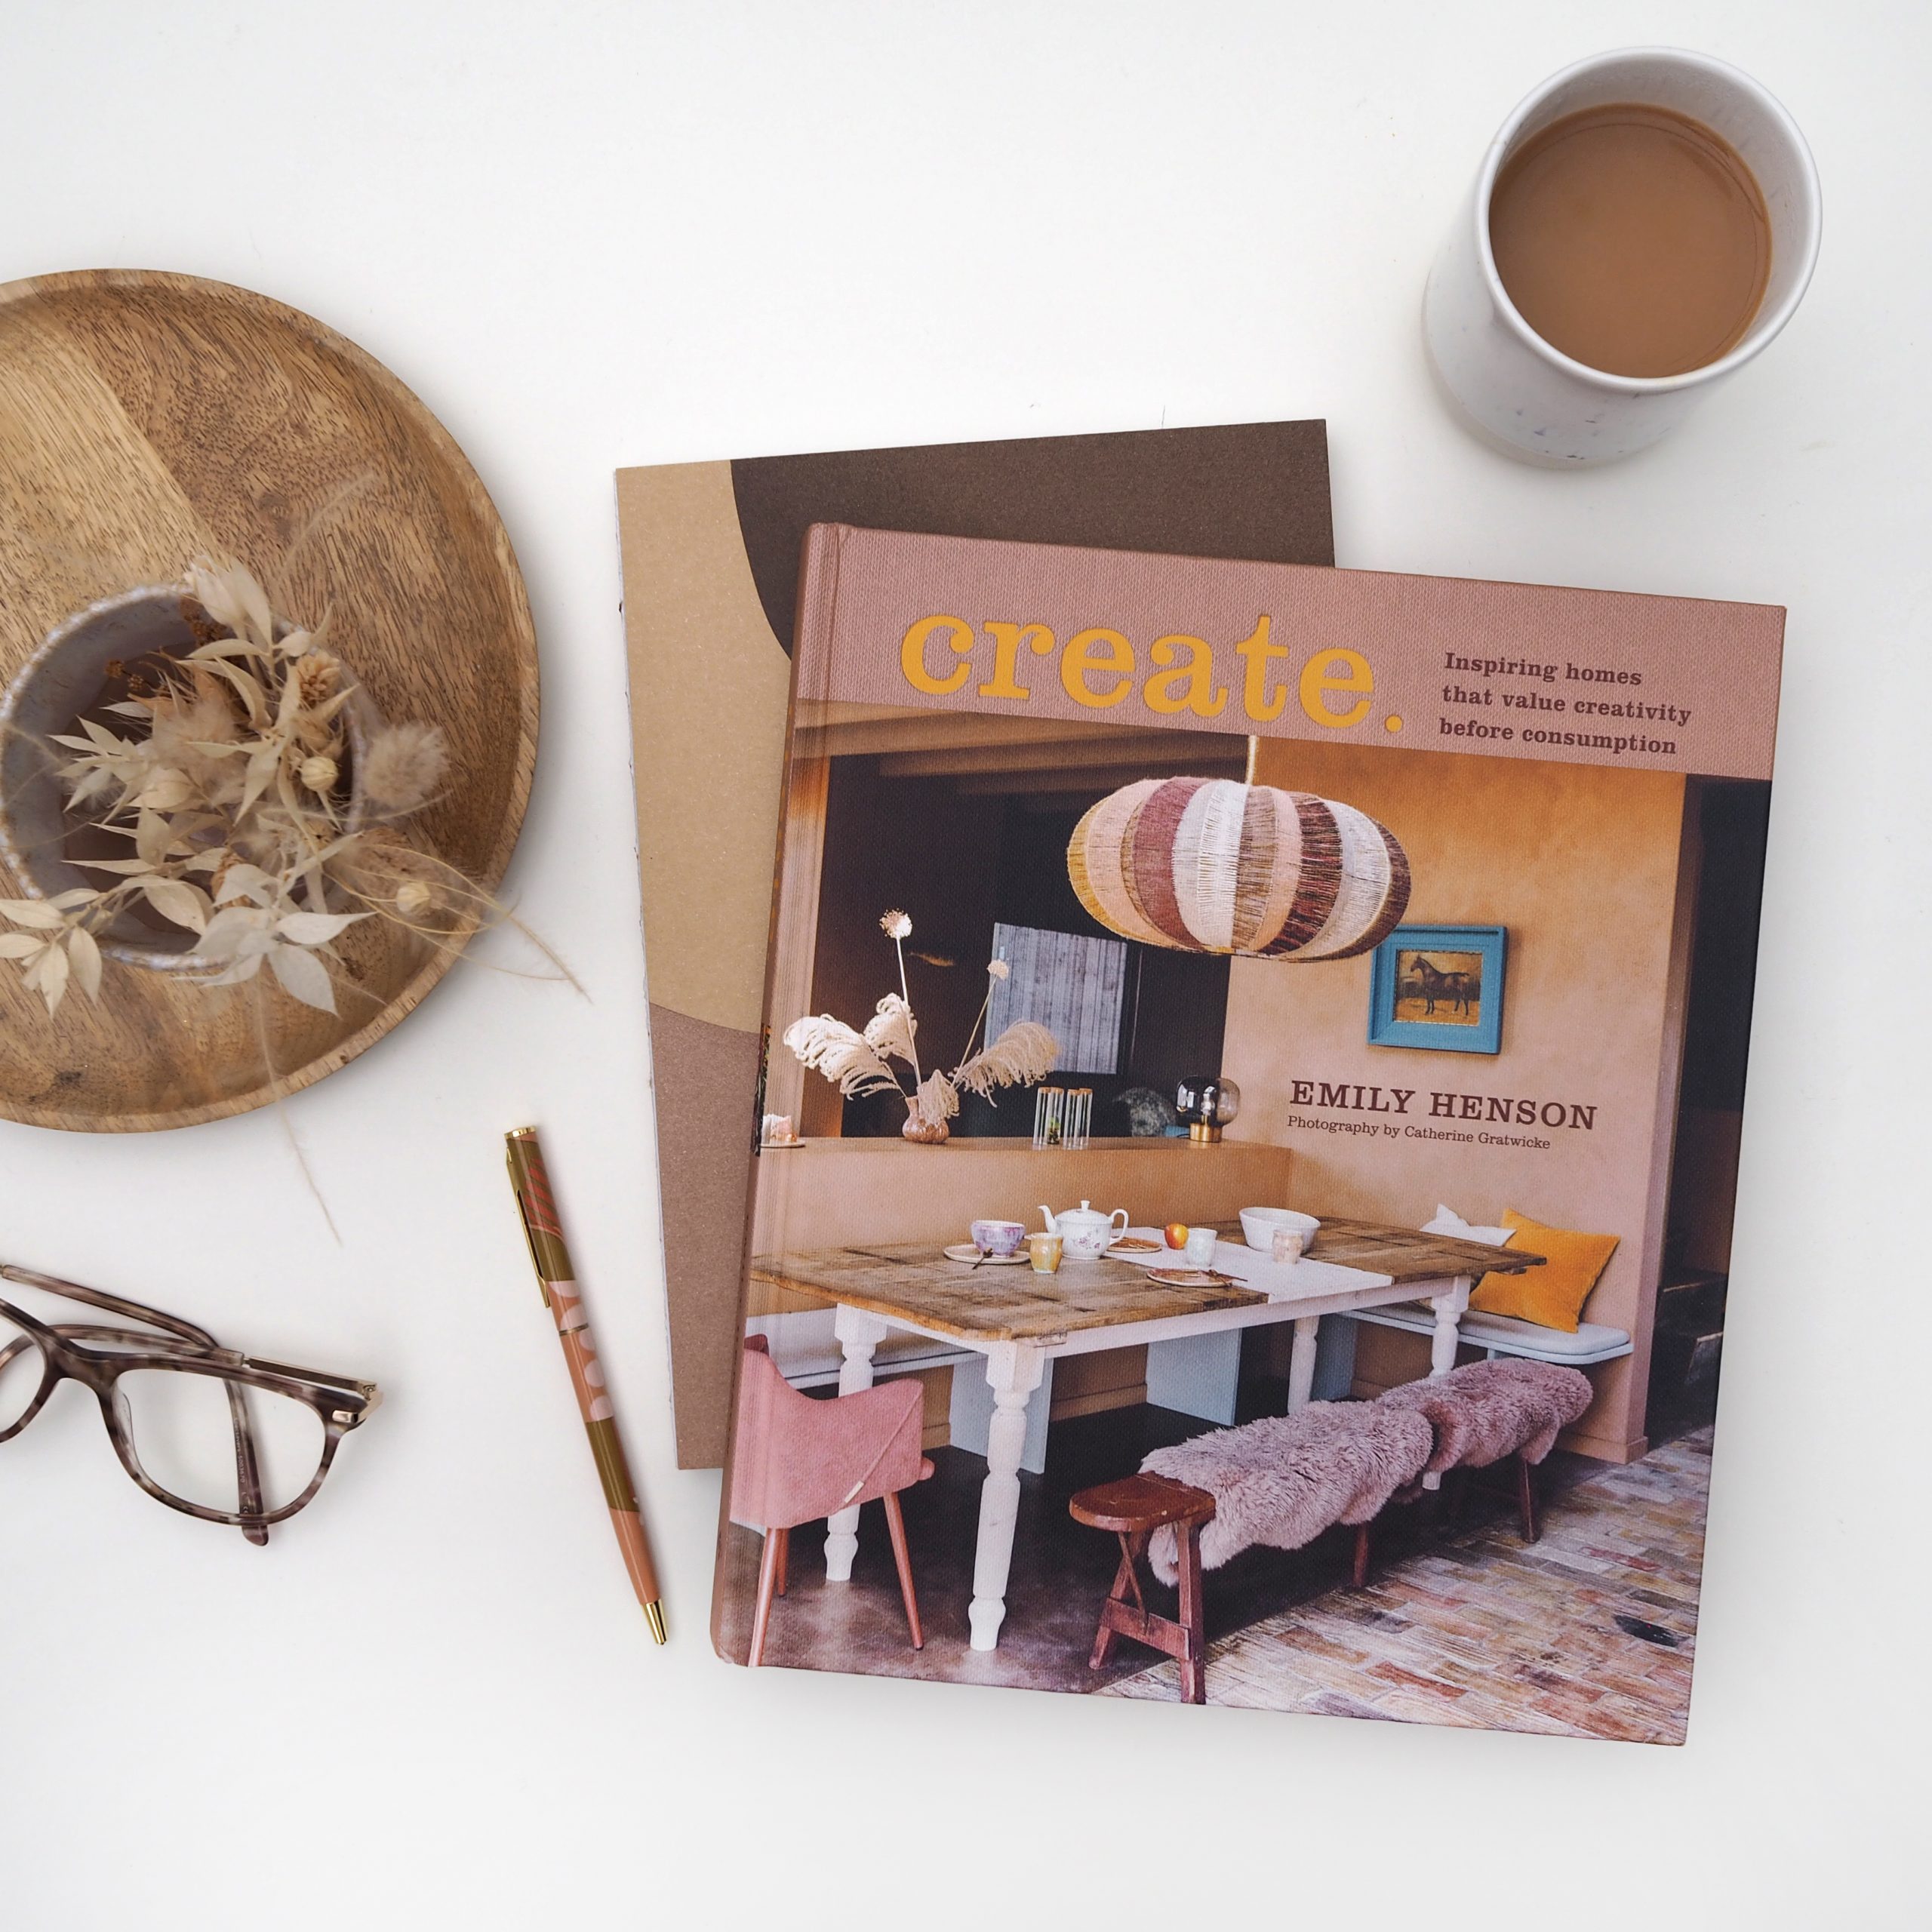 Create by Emily Henson - interiors coffee table book